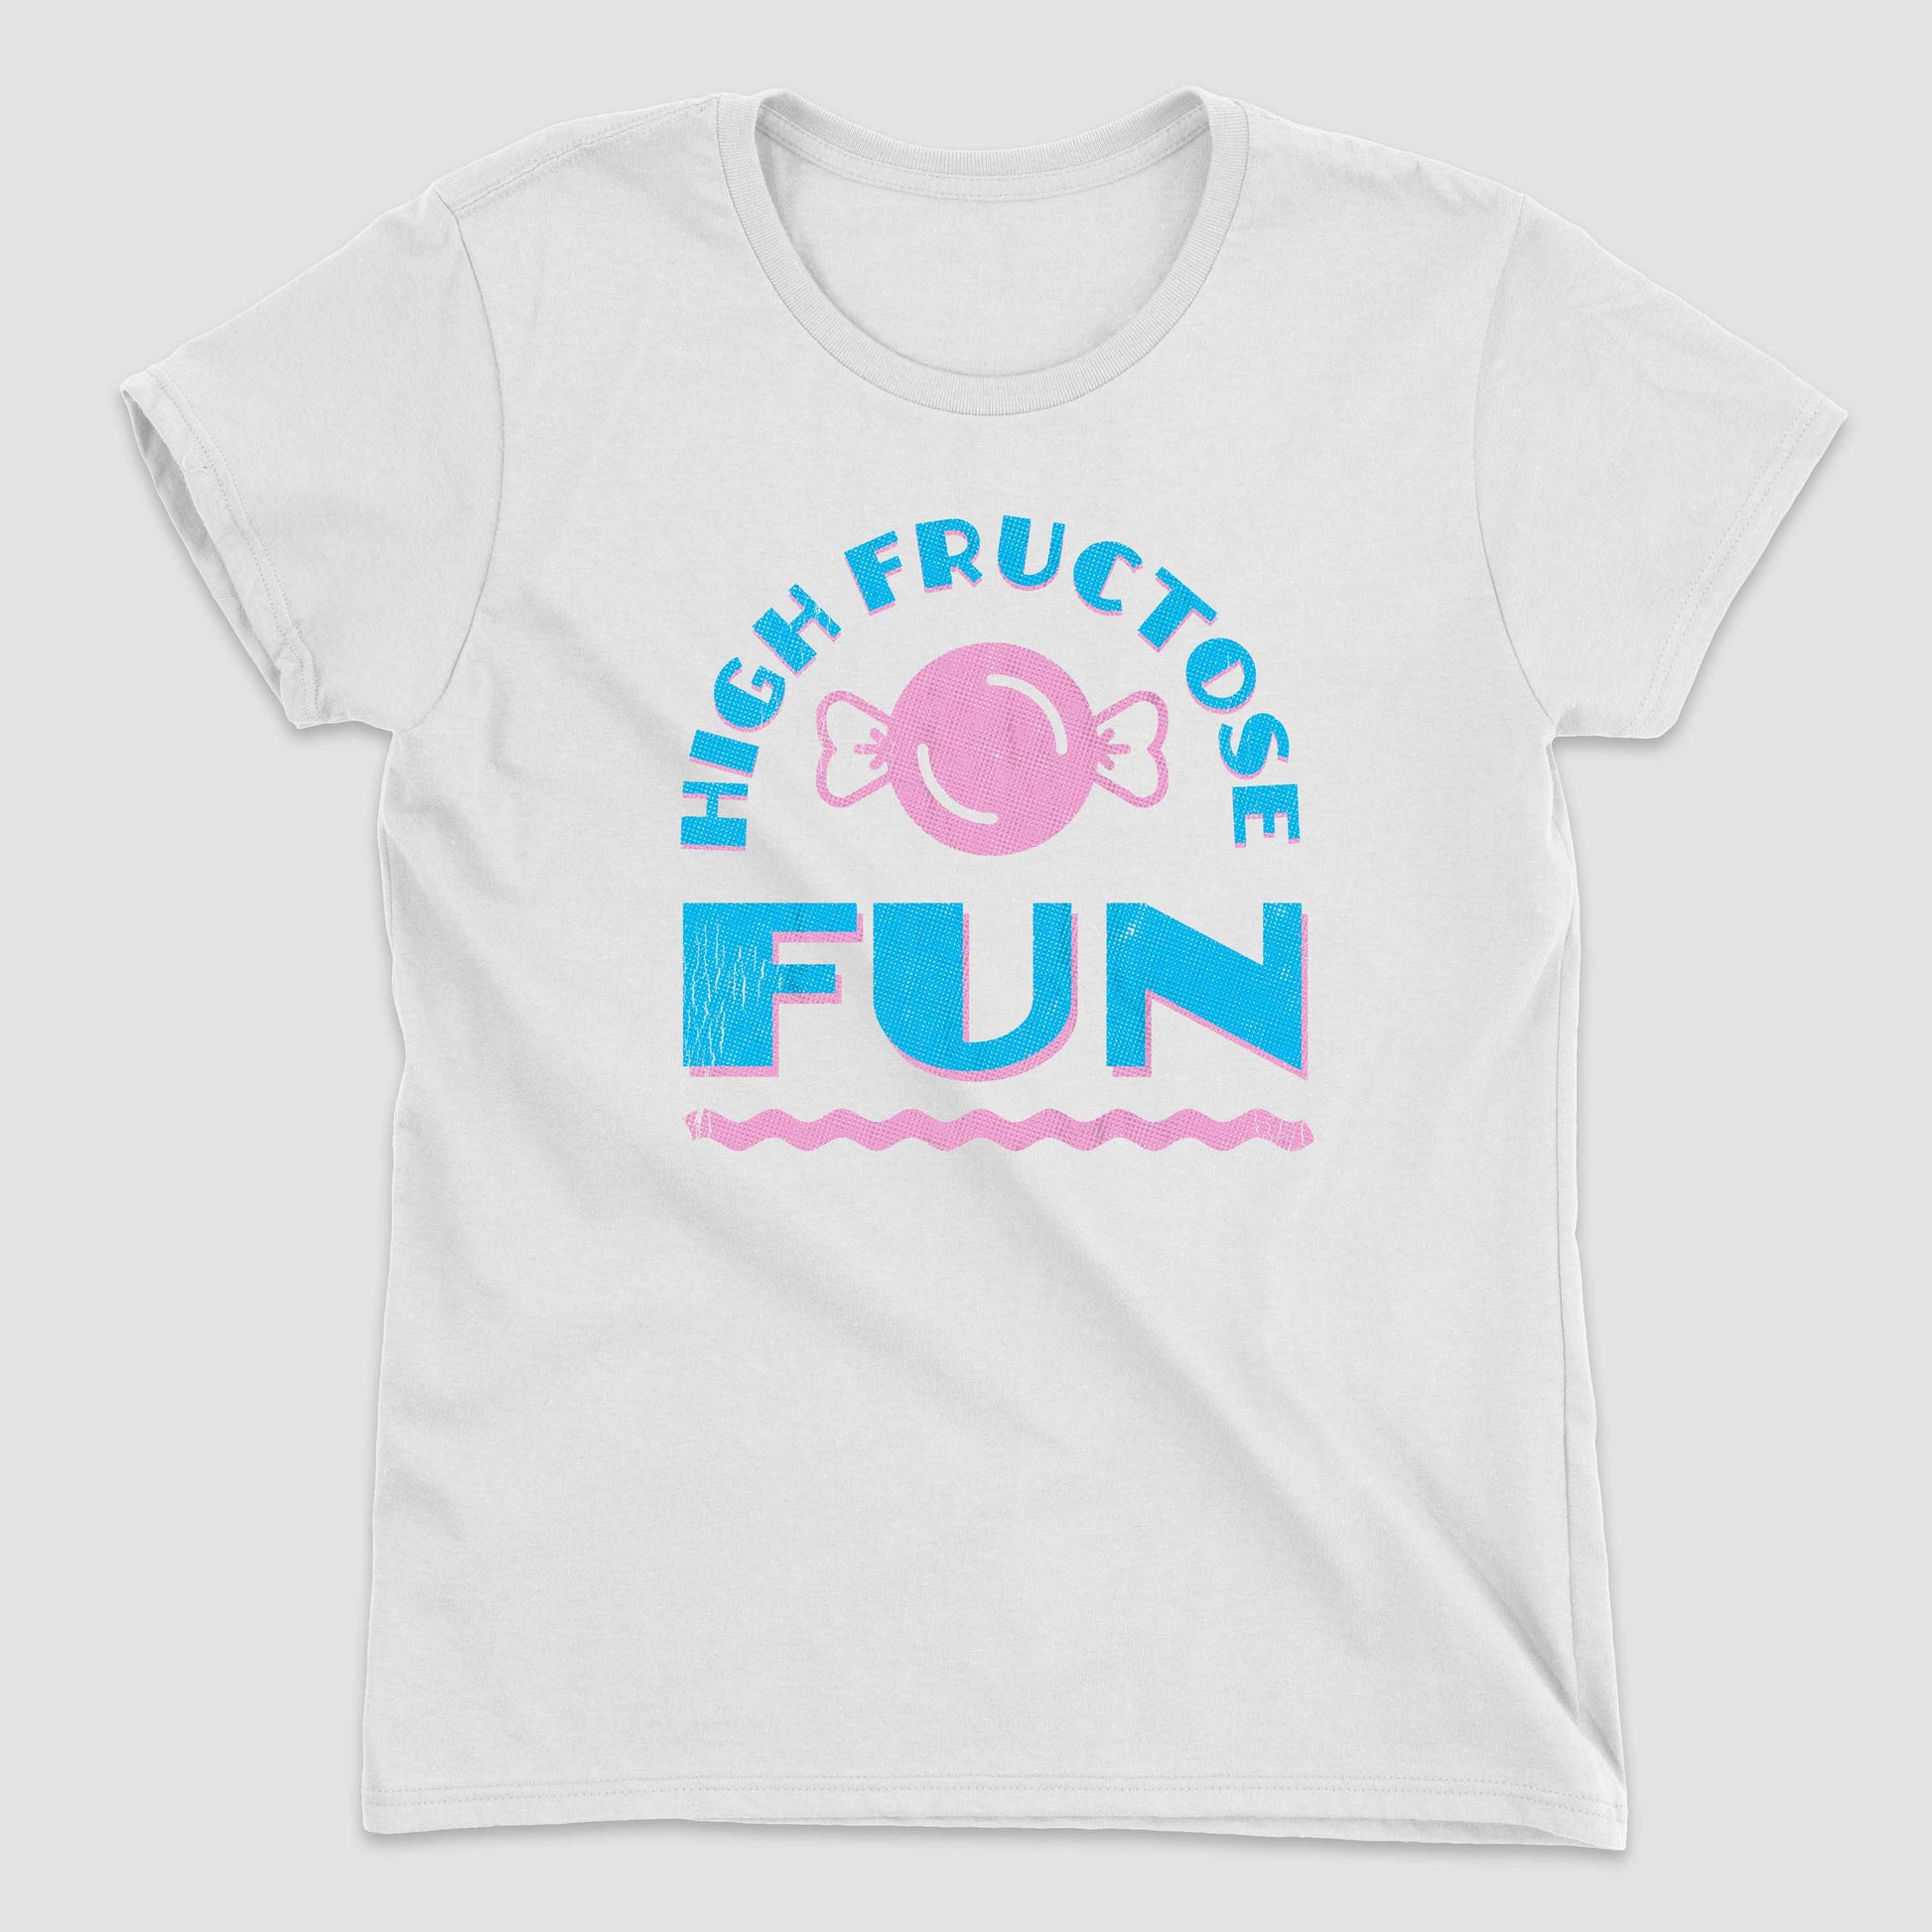 White High Fructose Fun Women's Graphic T-Shirt by Snaxtime